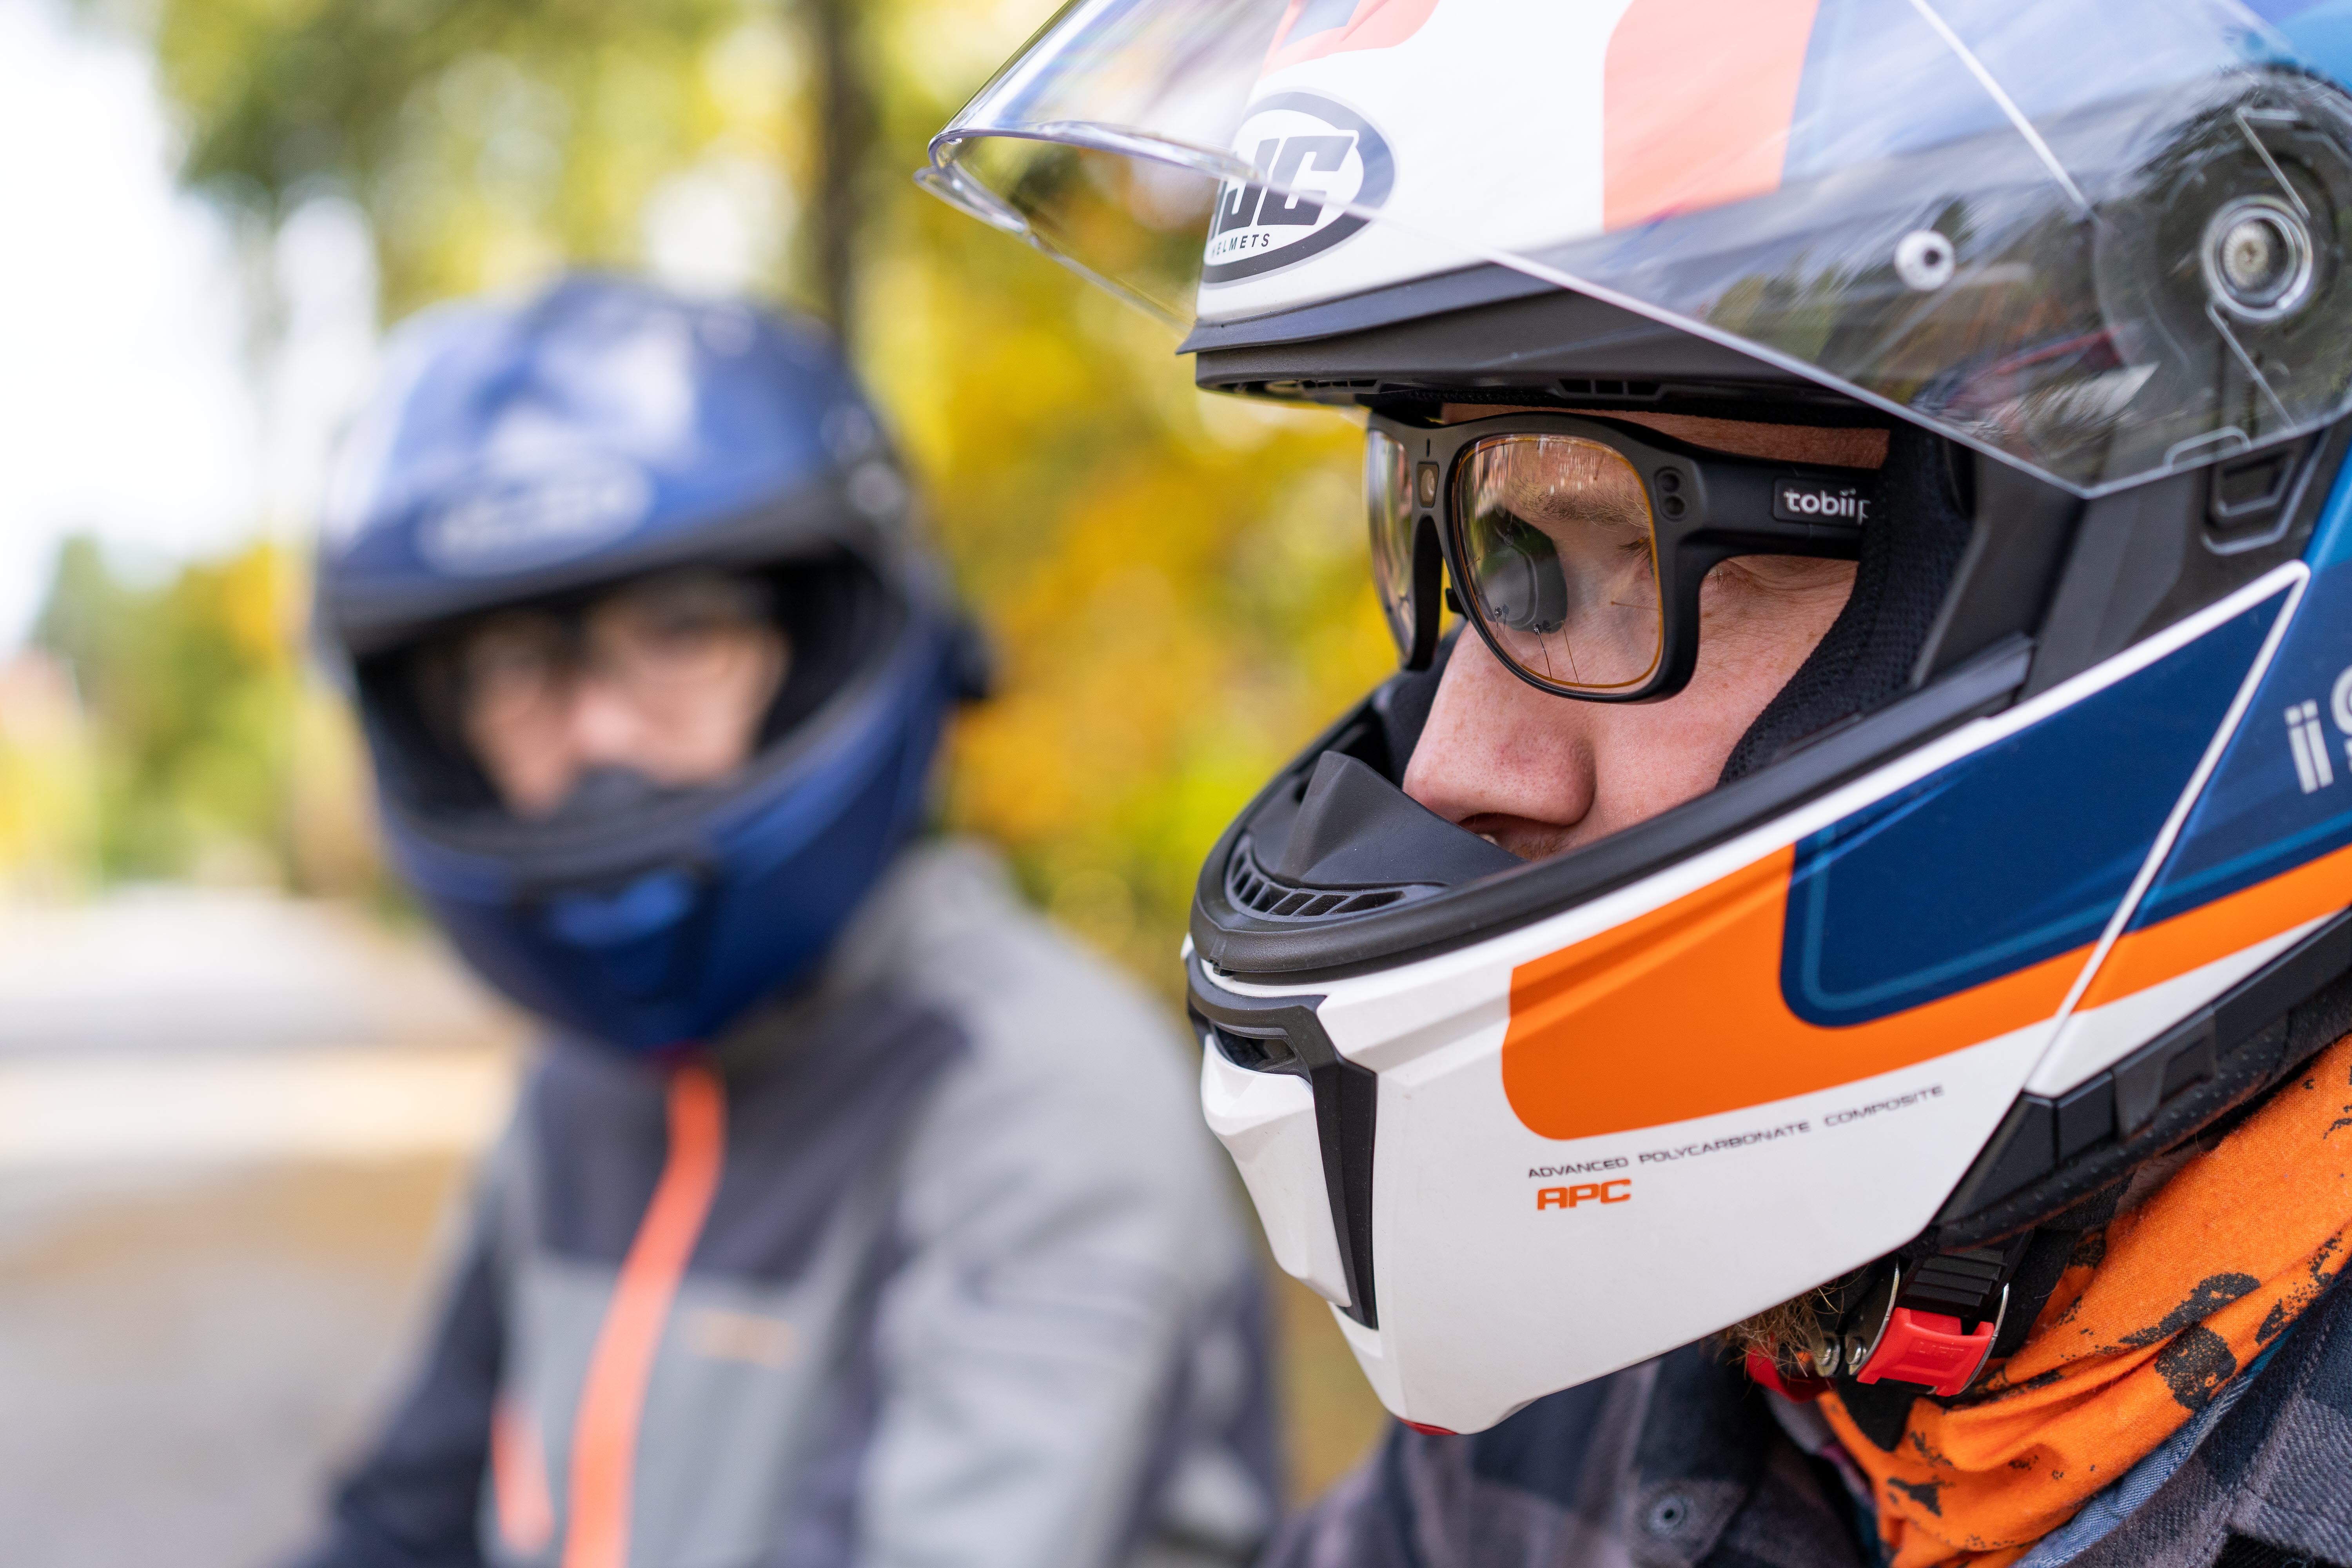 Wearing Tobii Pro Glasses 3 with a motorcycle helmet